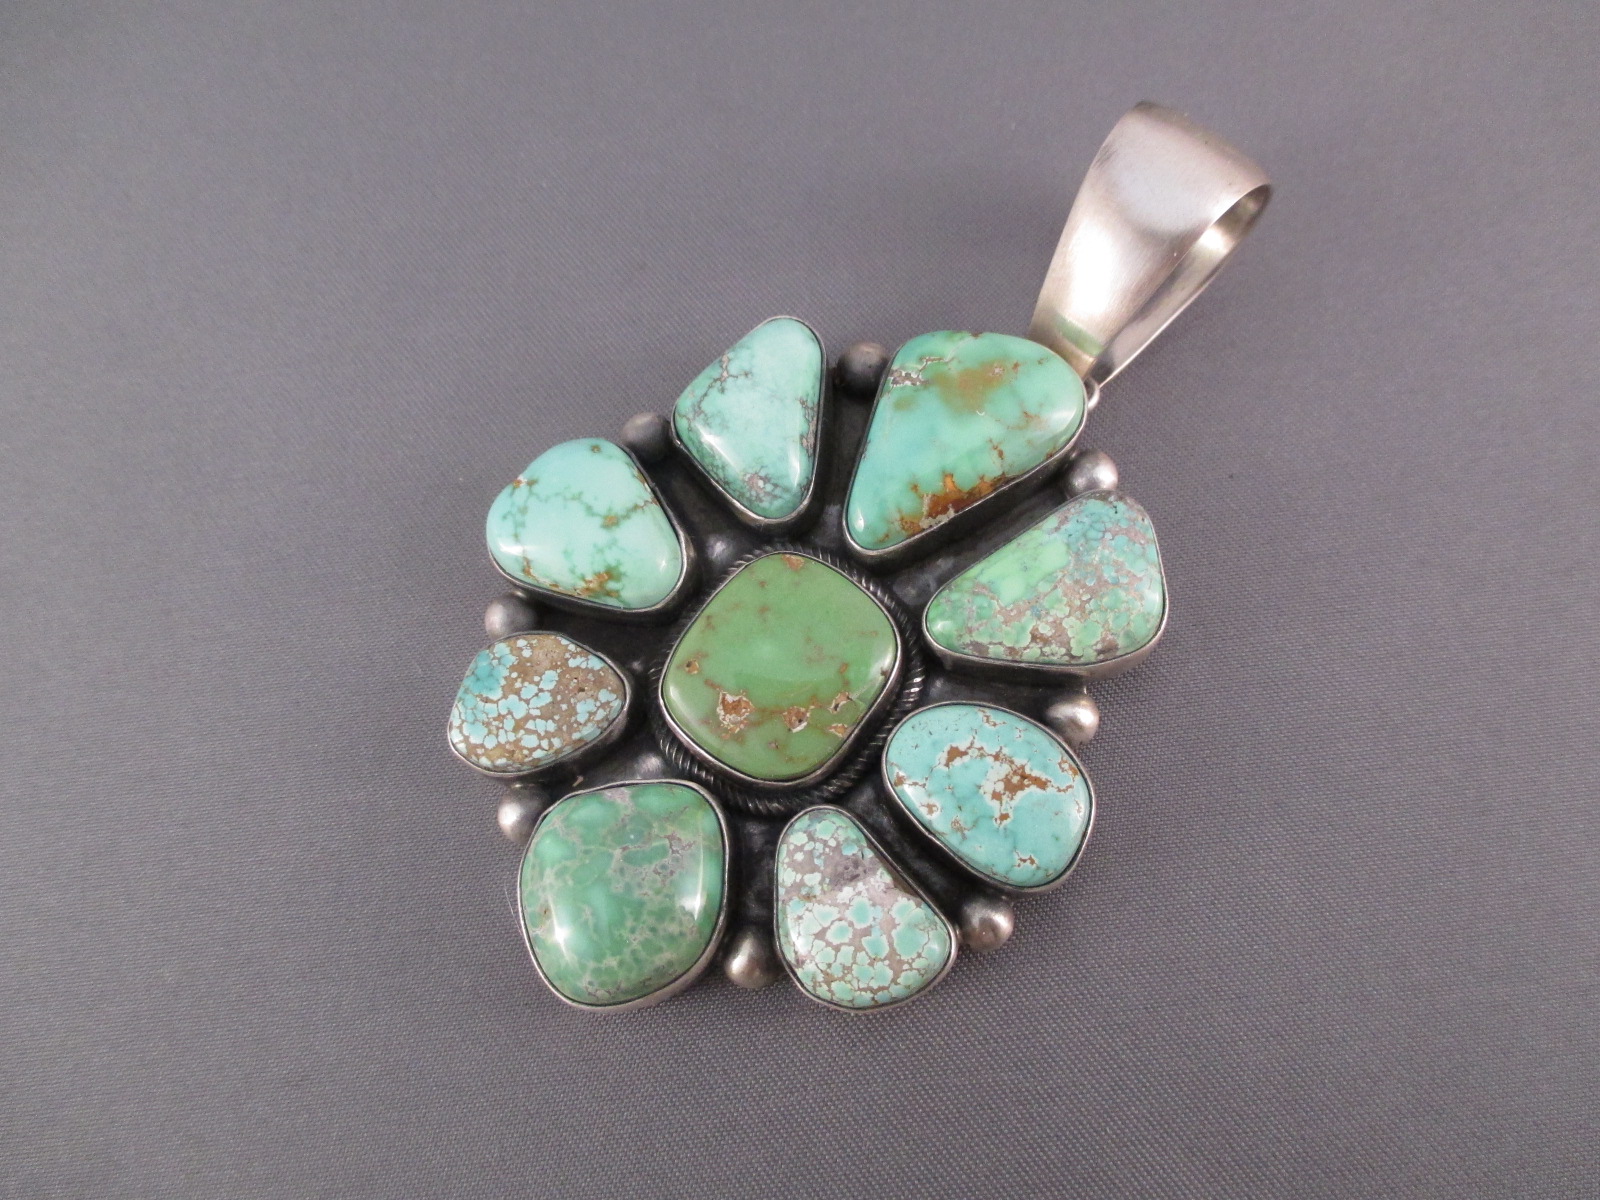 Carico Lake Turquoise Cluster Pendant by Navajo jewelry artist, Paul Livingston $1,450-